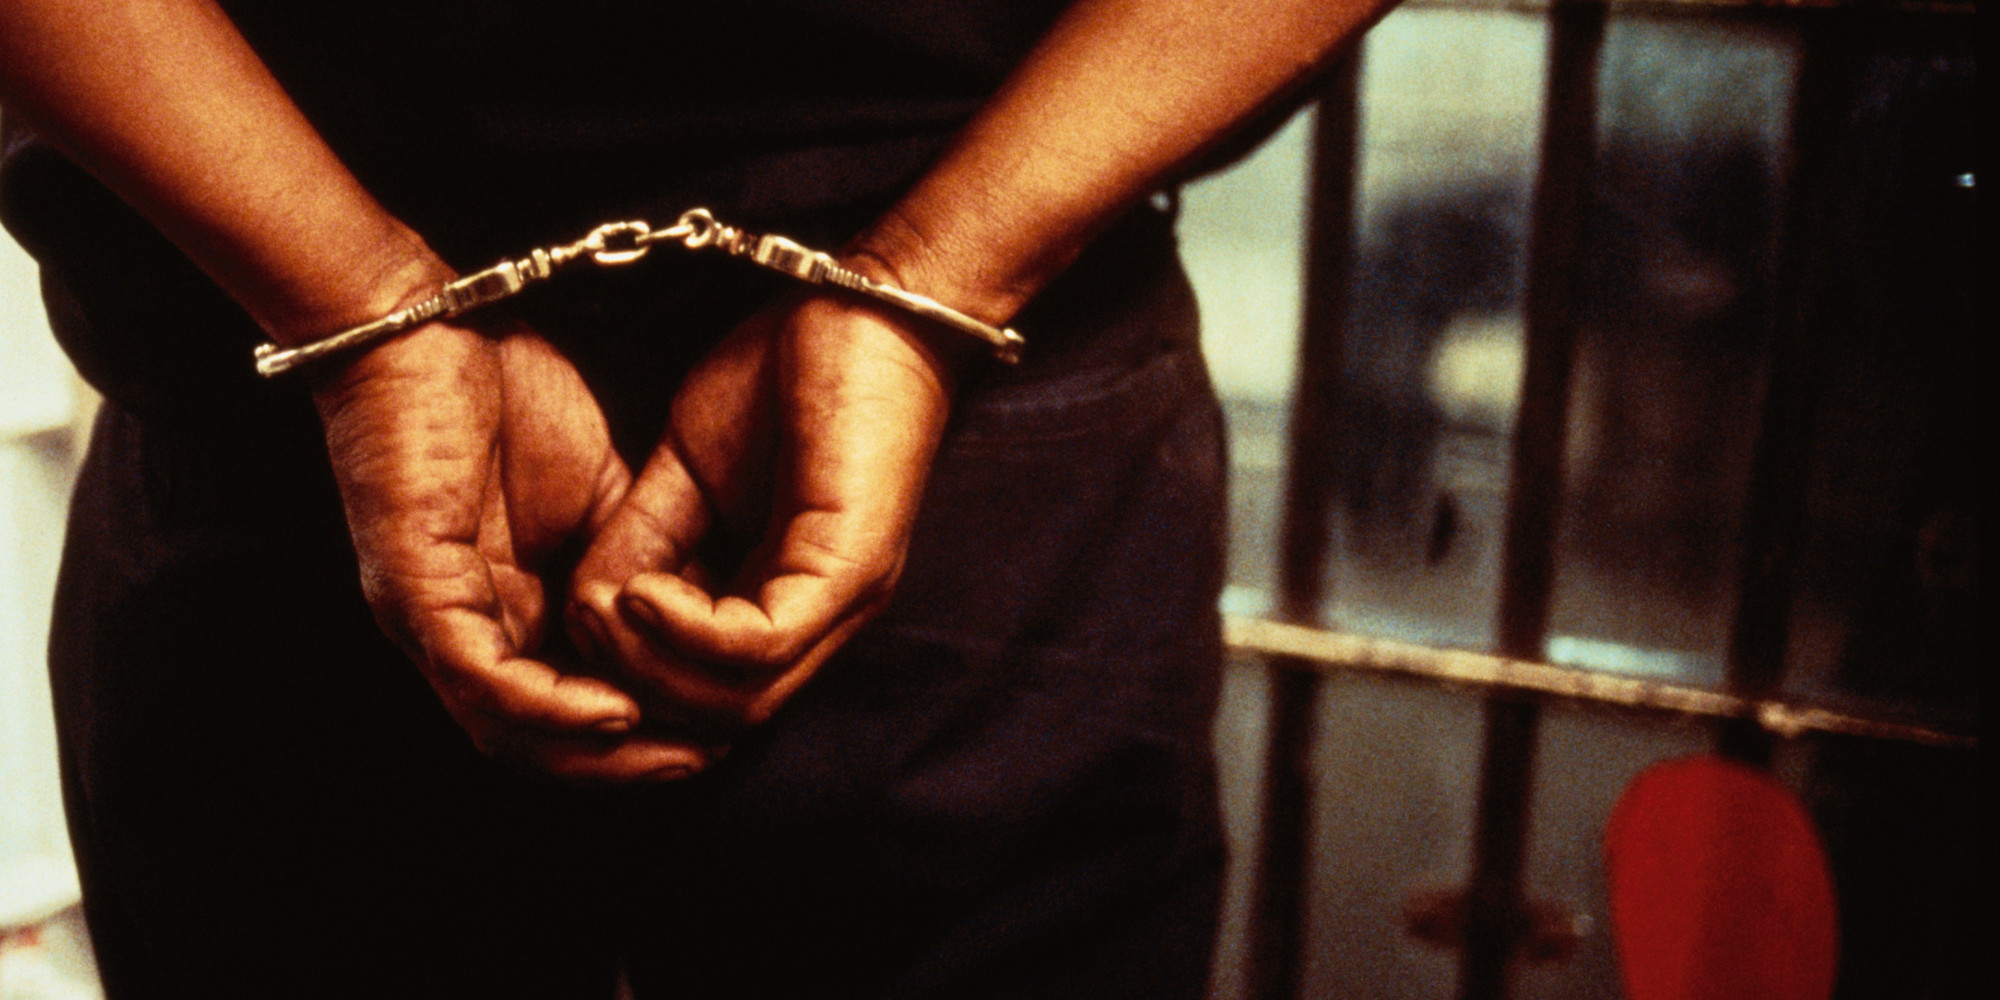 Man Docked Over Alleged Theft